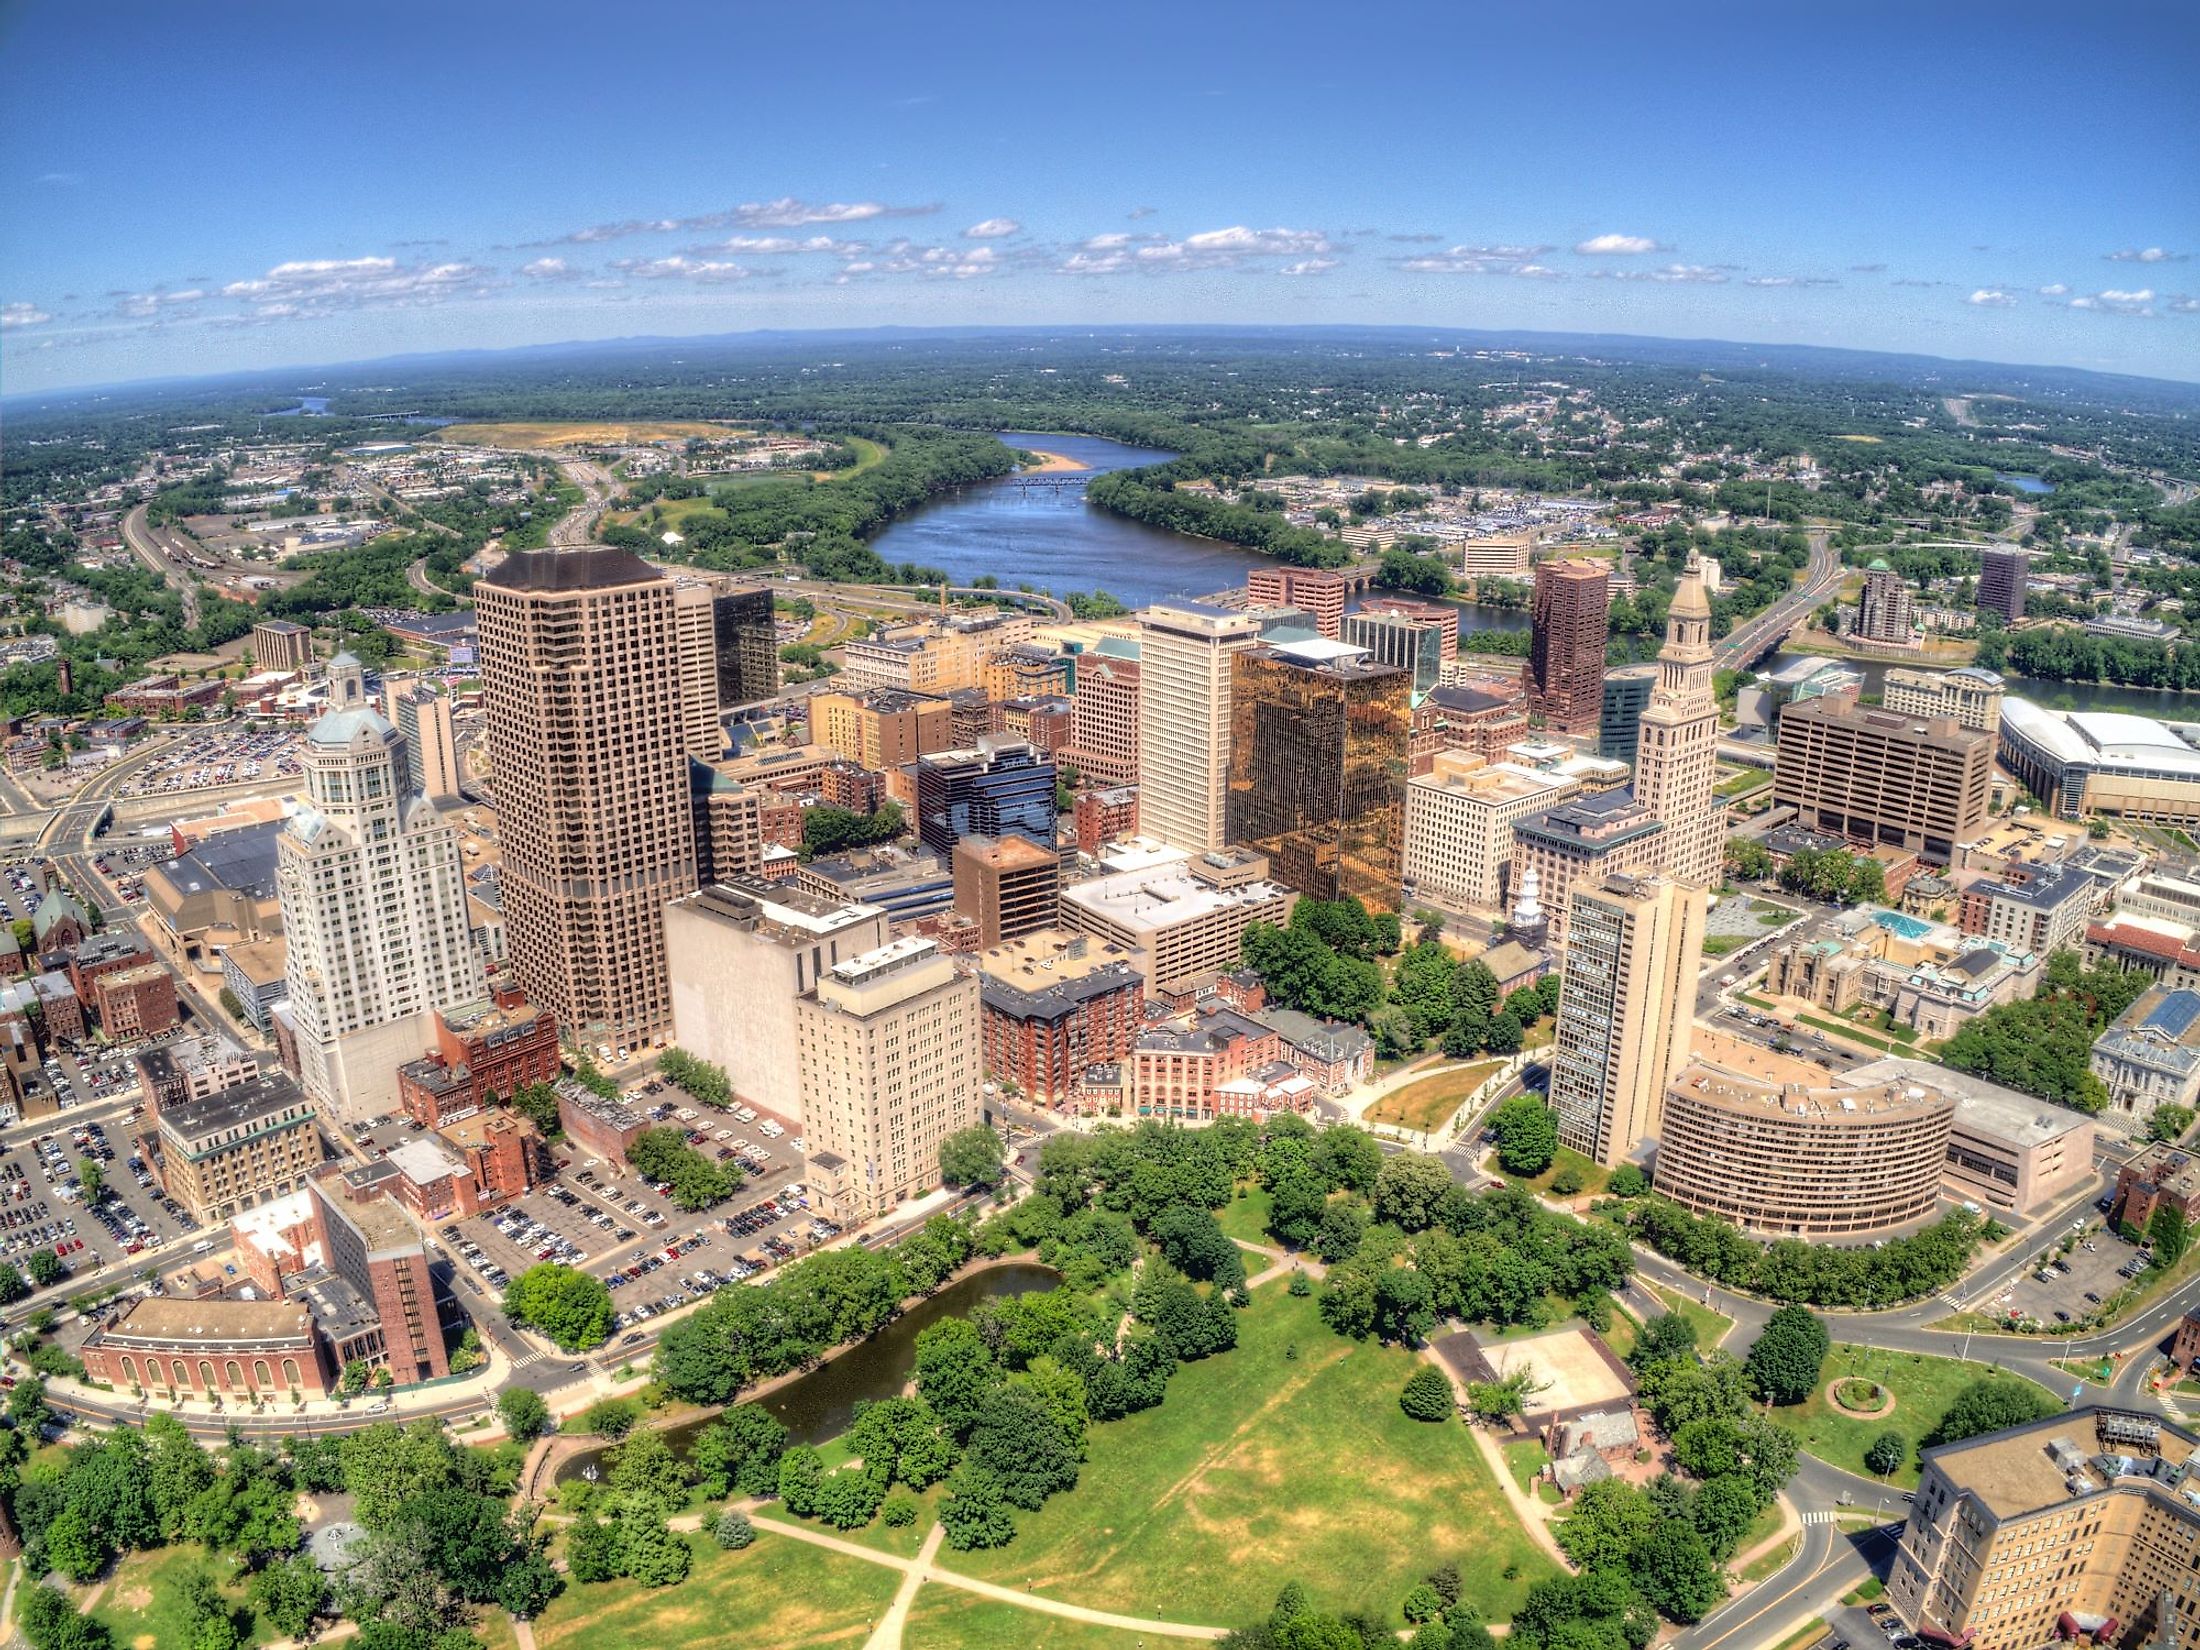 Downtown Hartford, Connecticut skyline seen in summer by drone. 